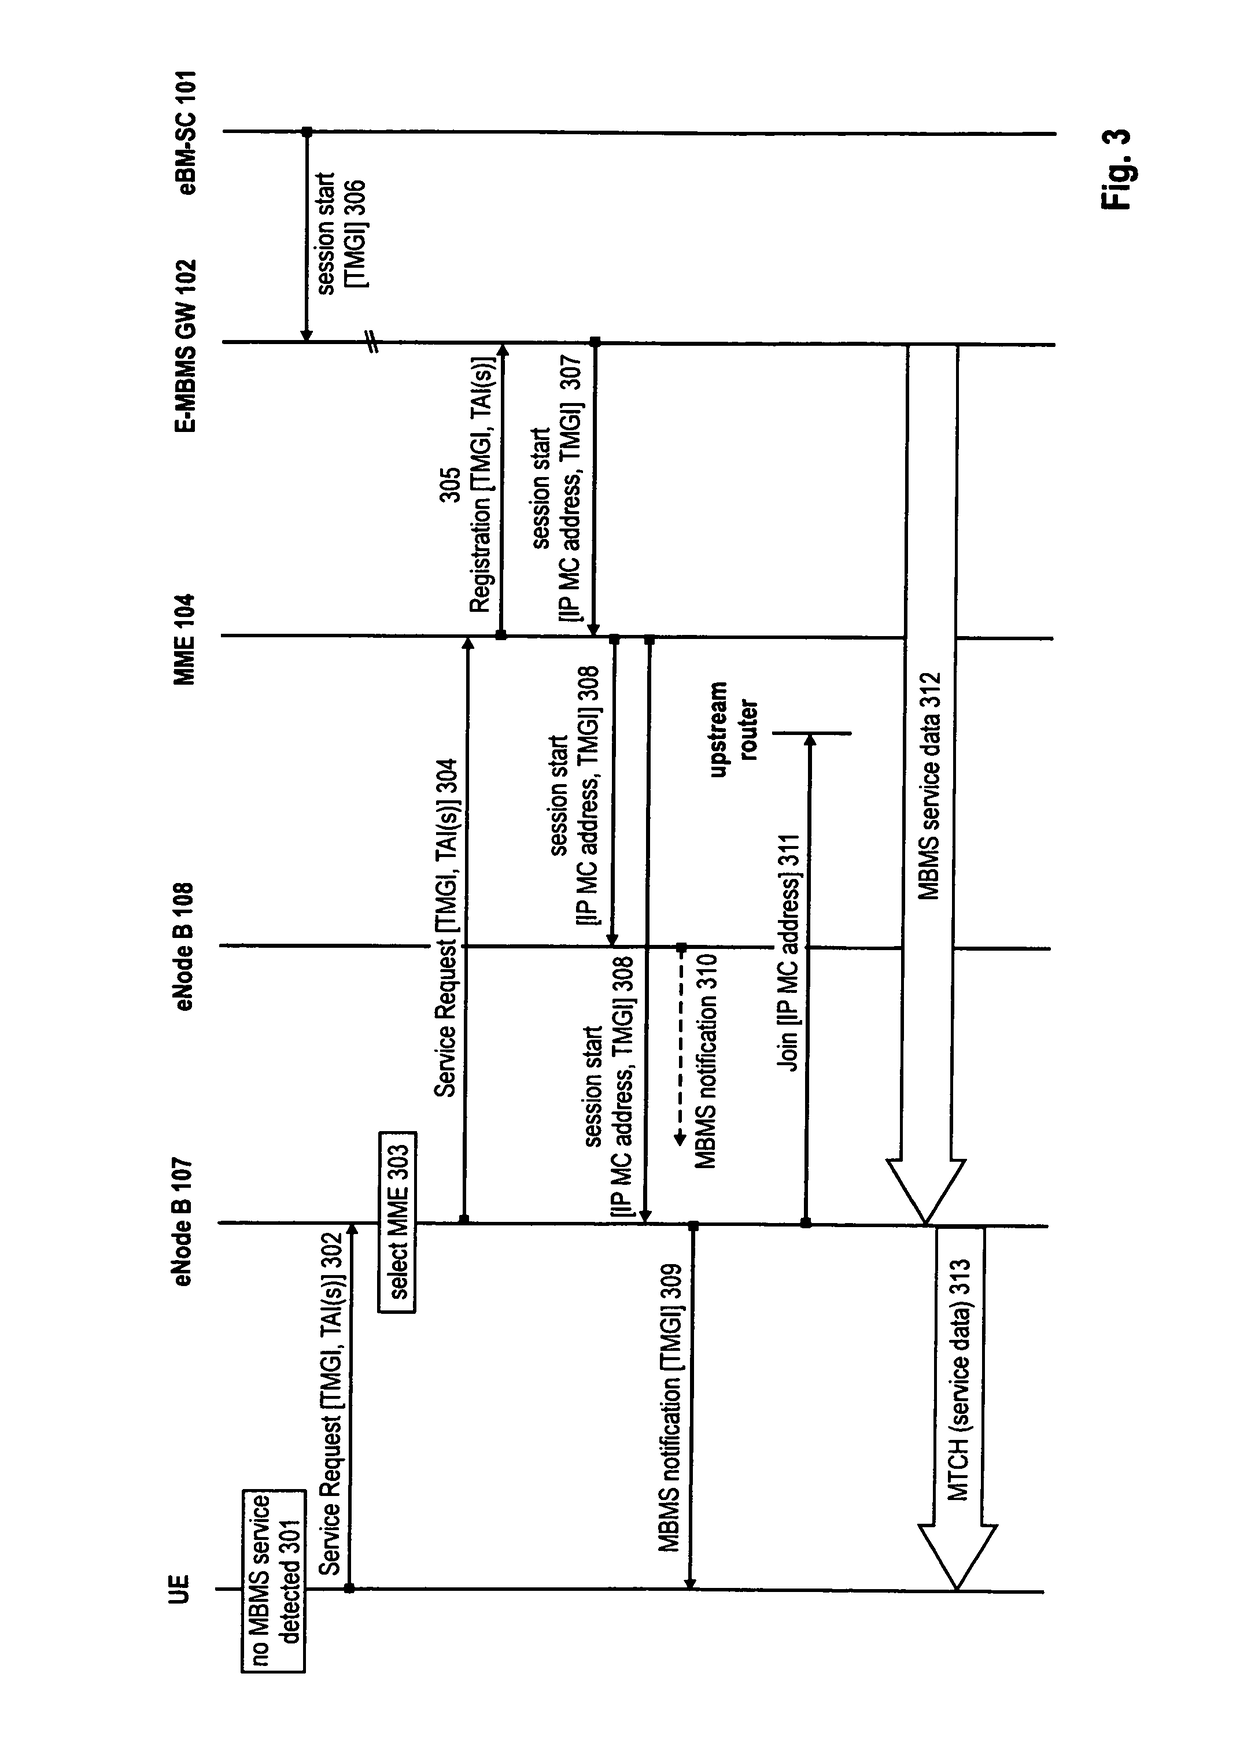 Management of session control signaling for multicast/broadcast services